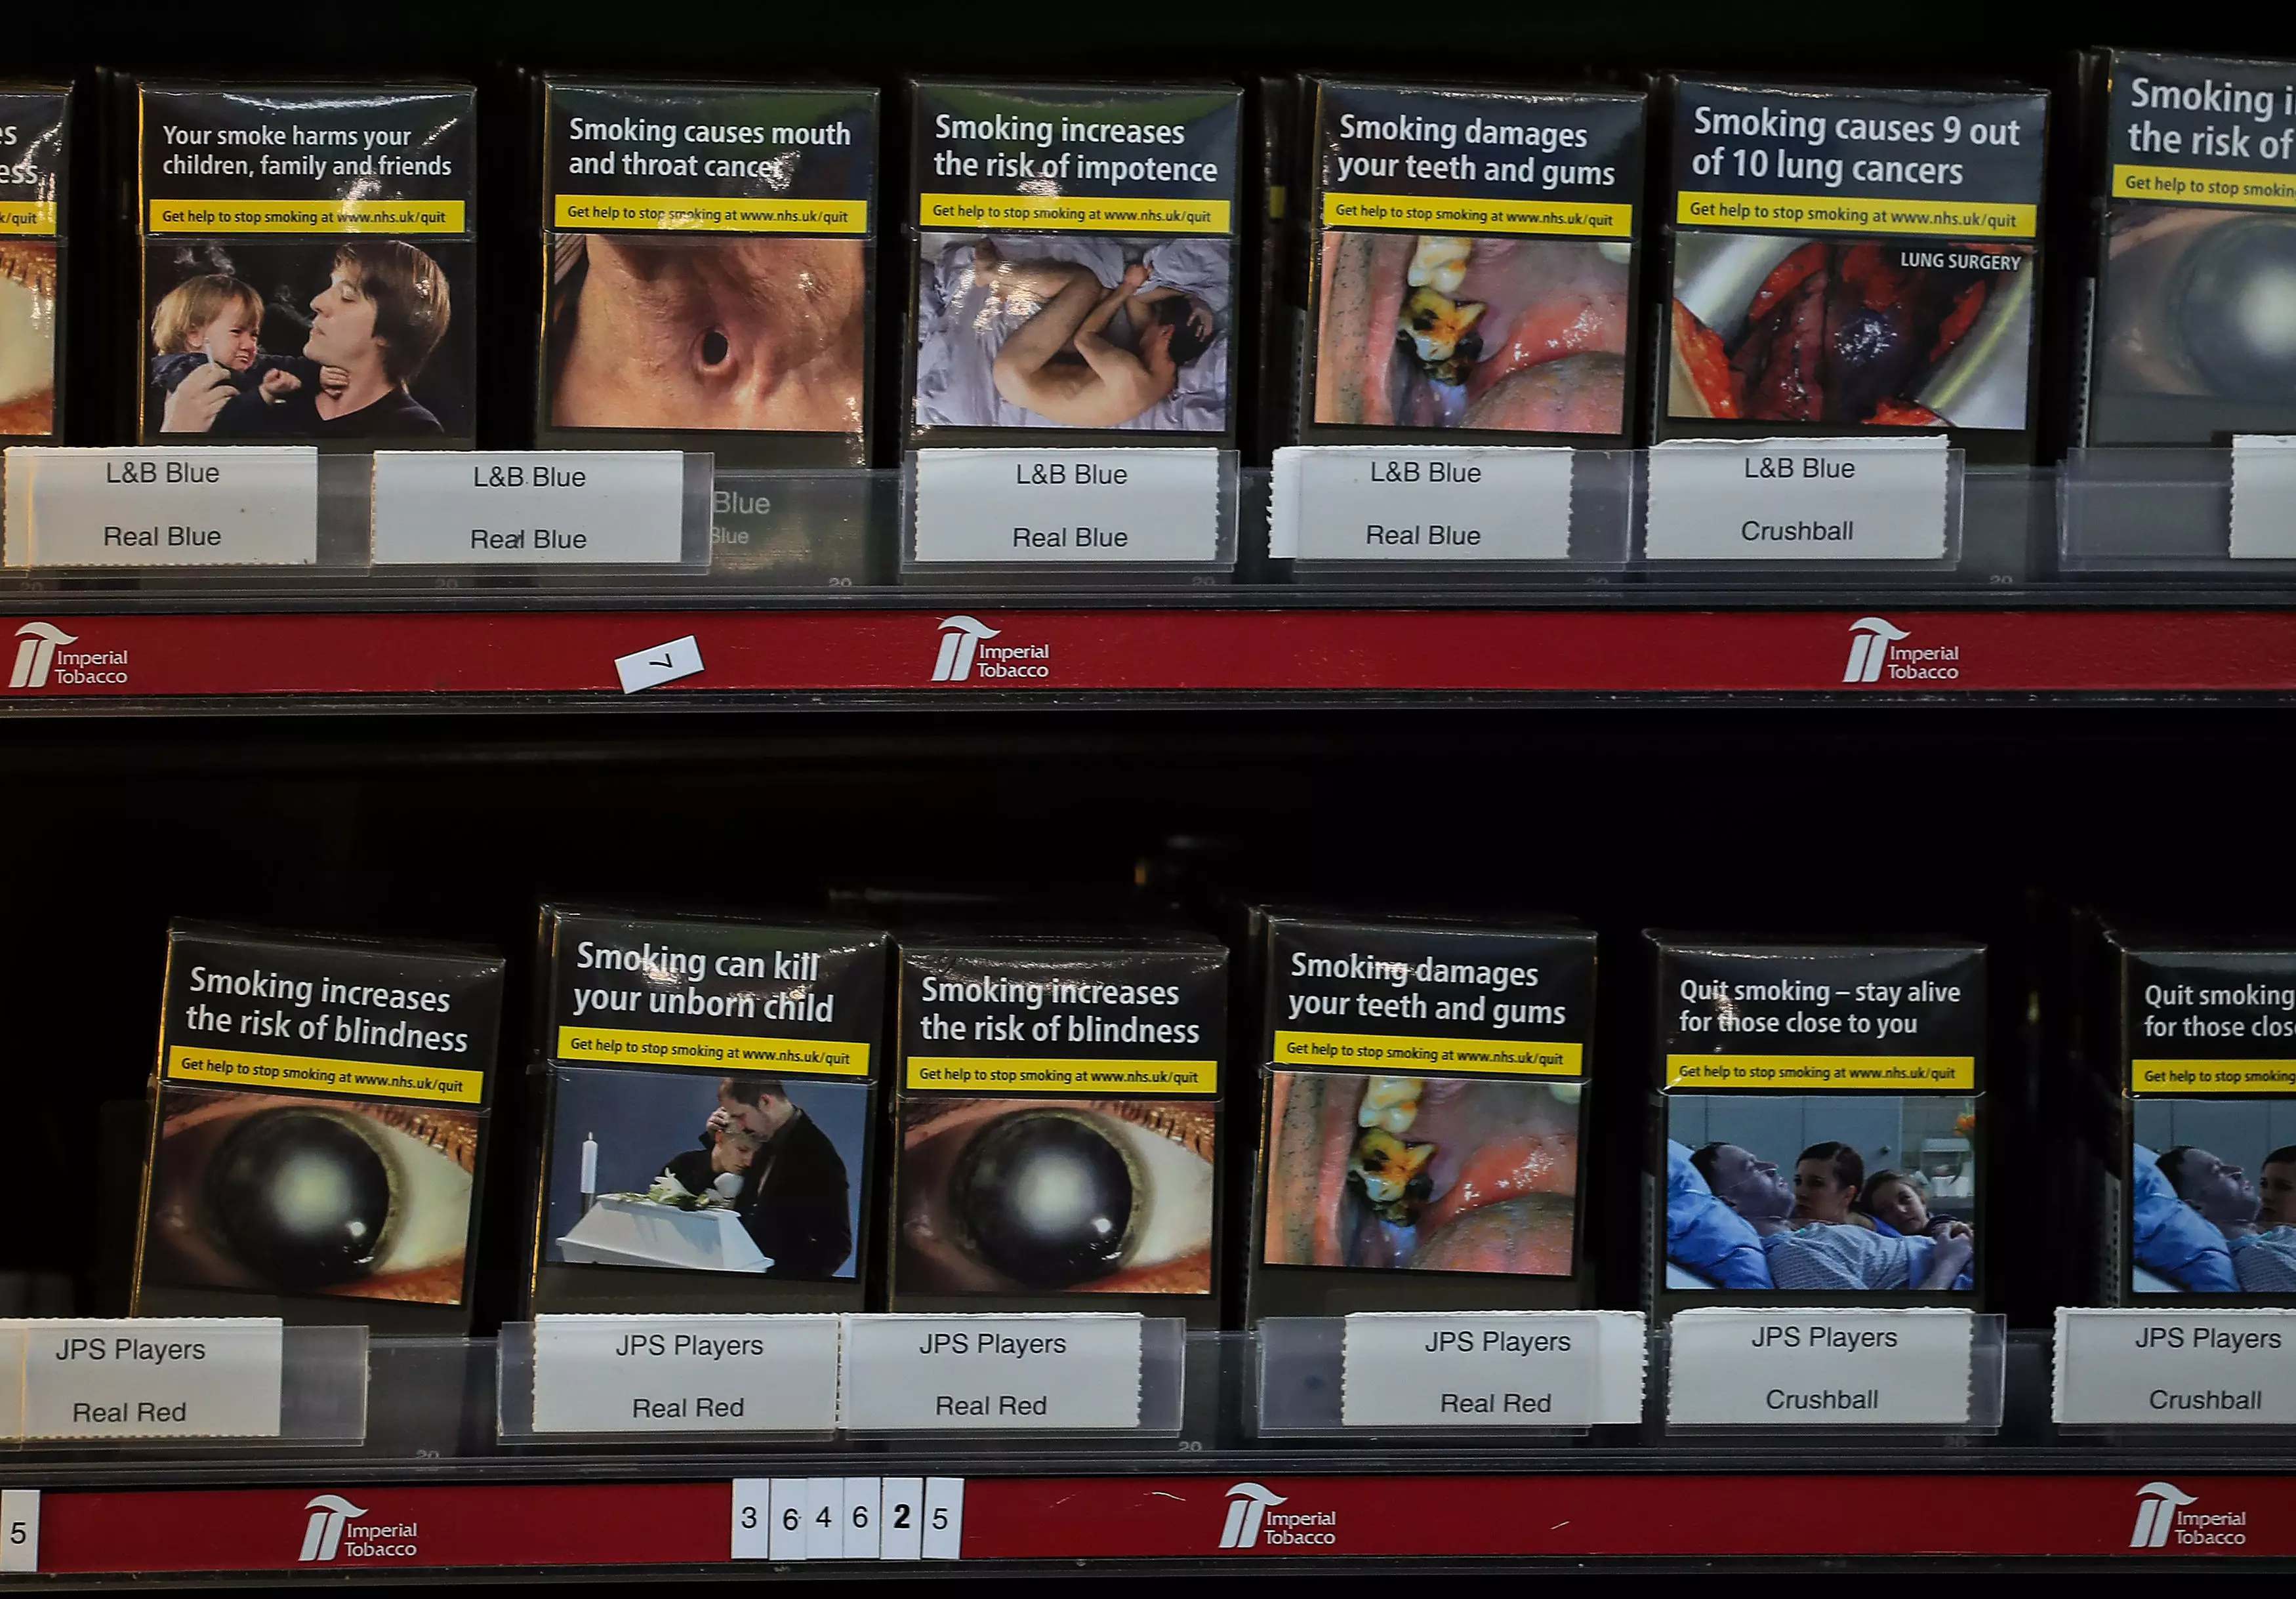 Laws to deter smokers have already been put into place, including graphic images on packets.